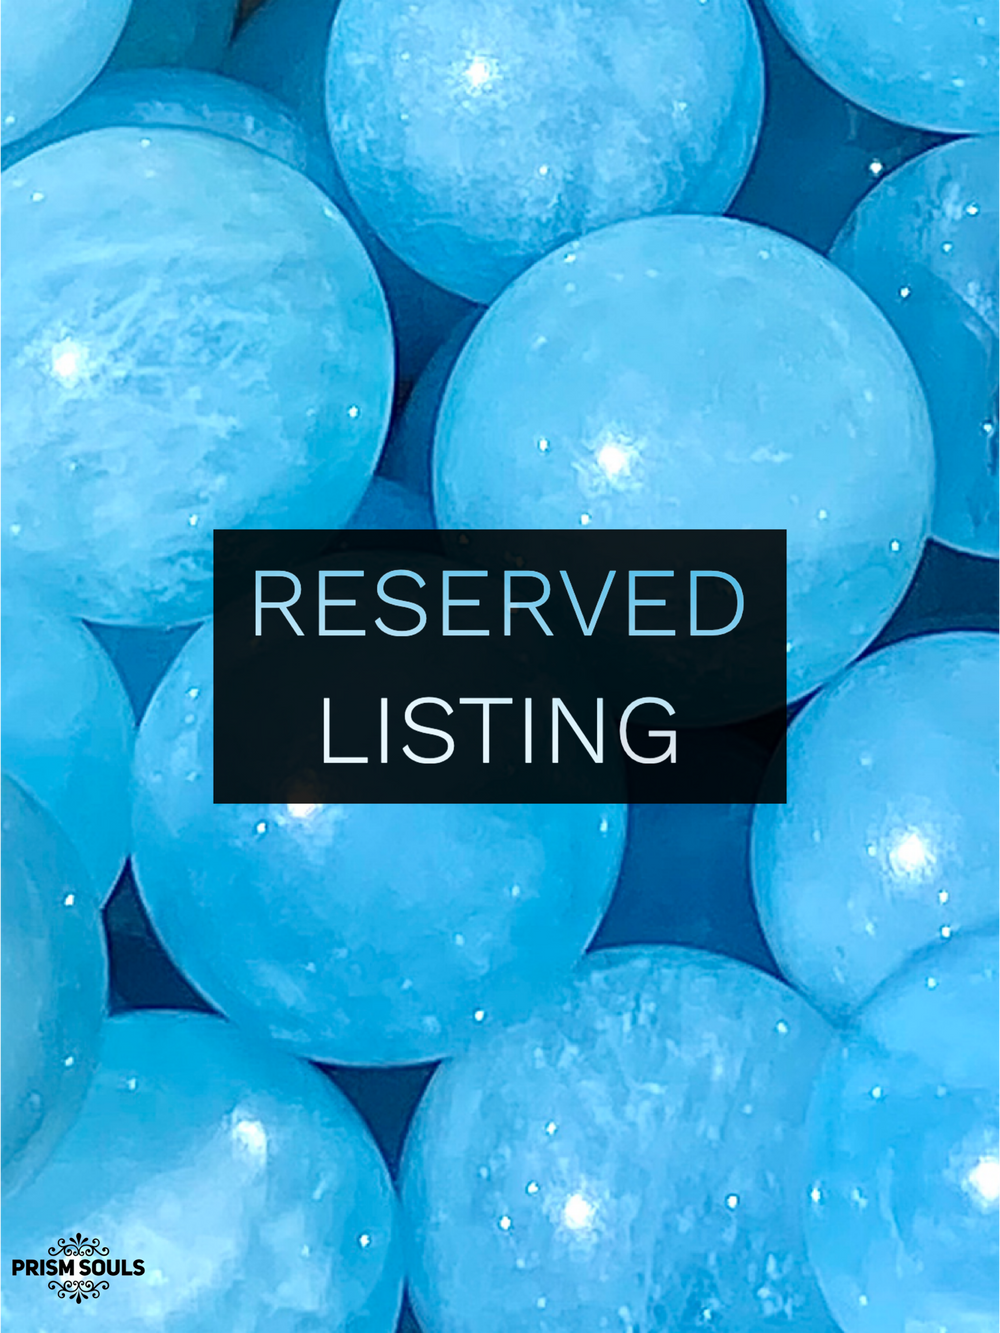 RESERVED LISTING - artsymeow